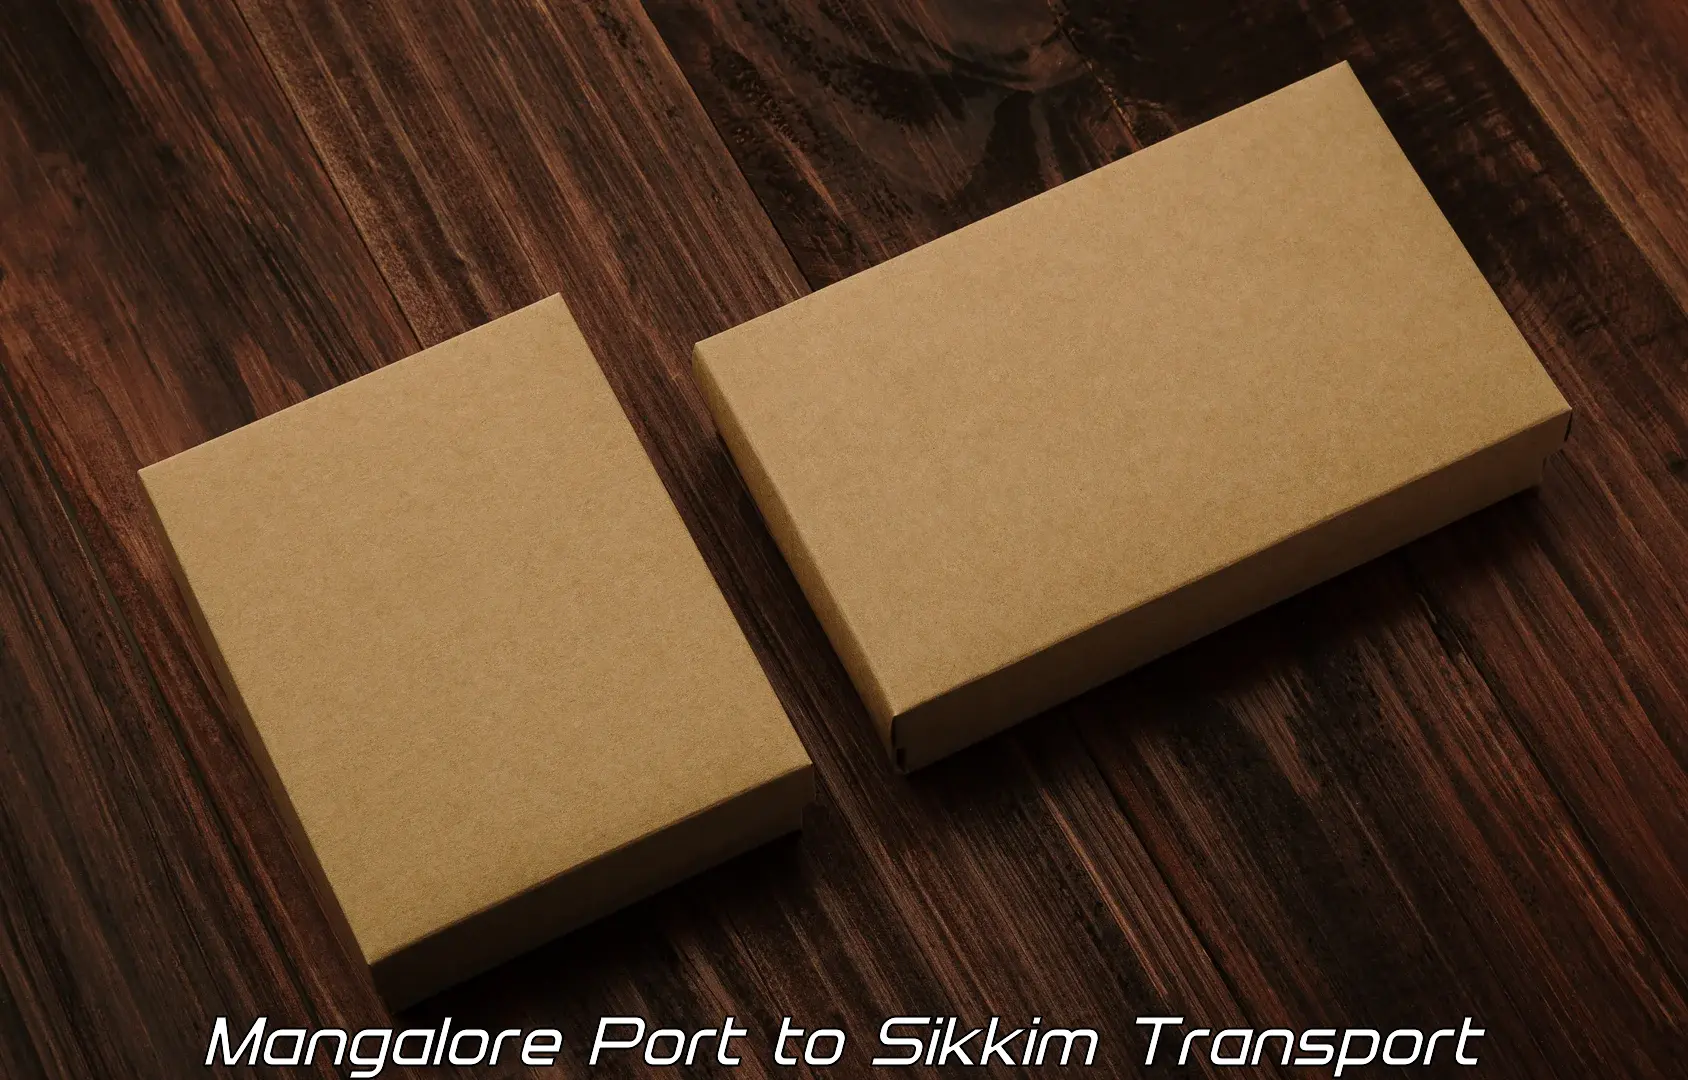 Land transport services Mangalore Port to South Sikkim